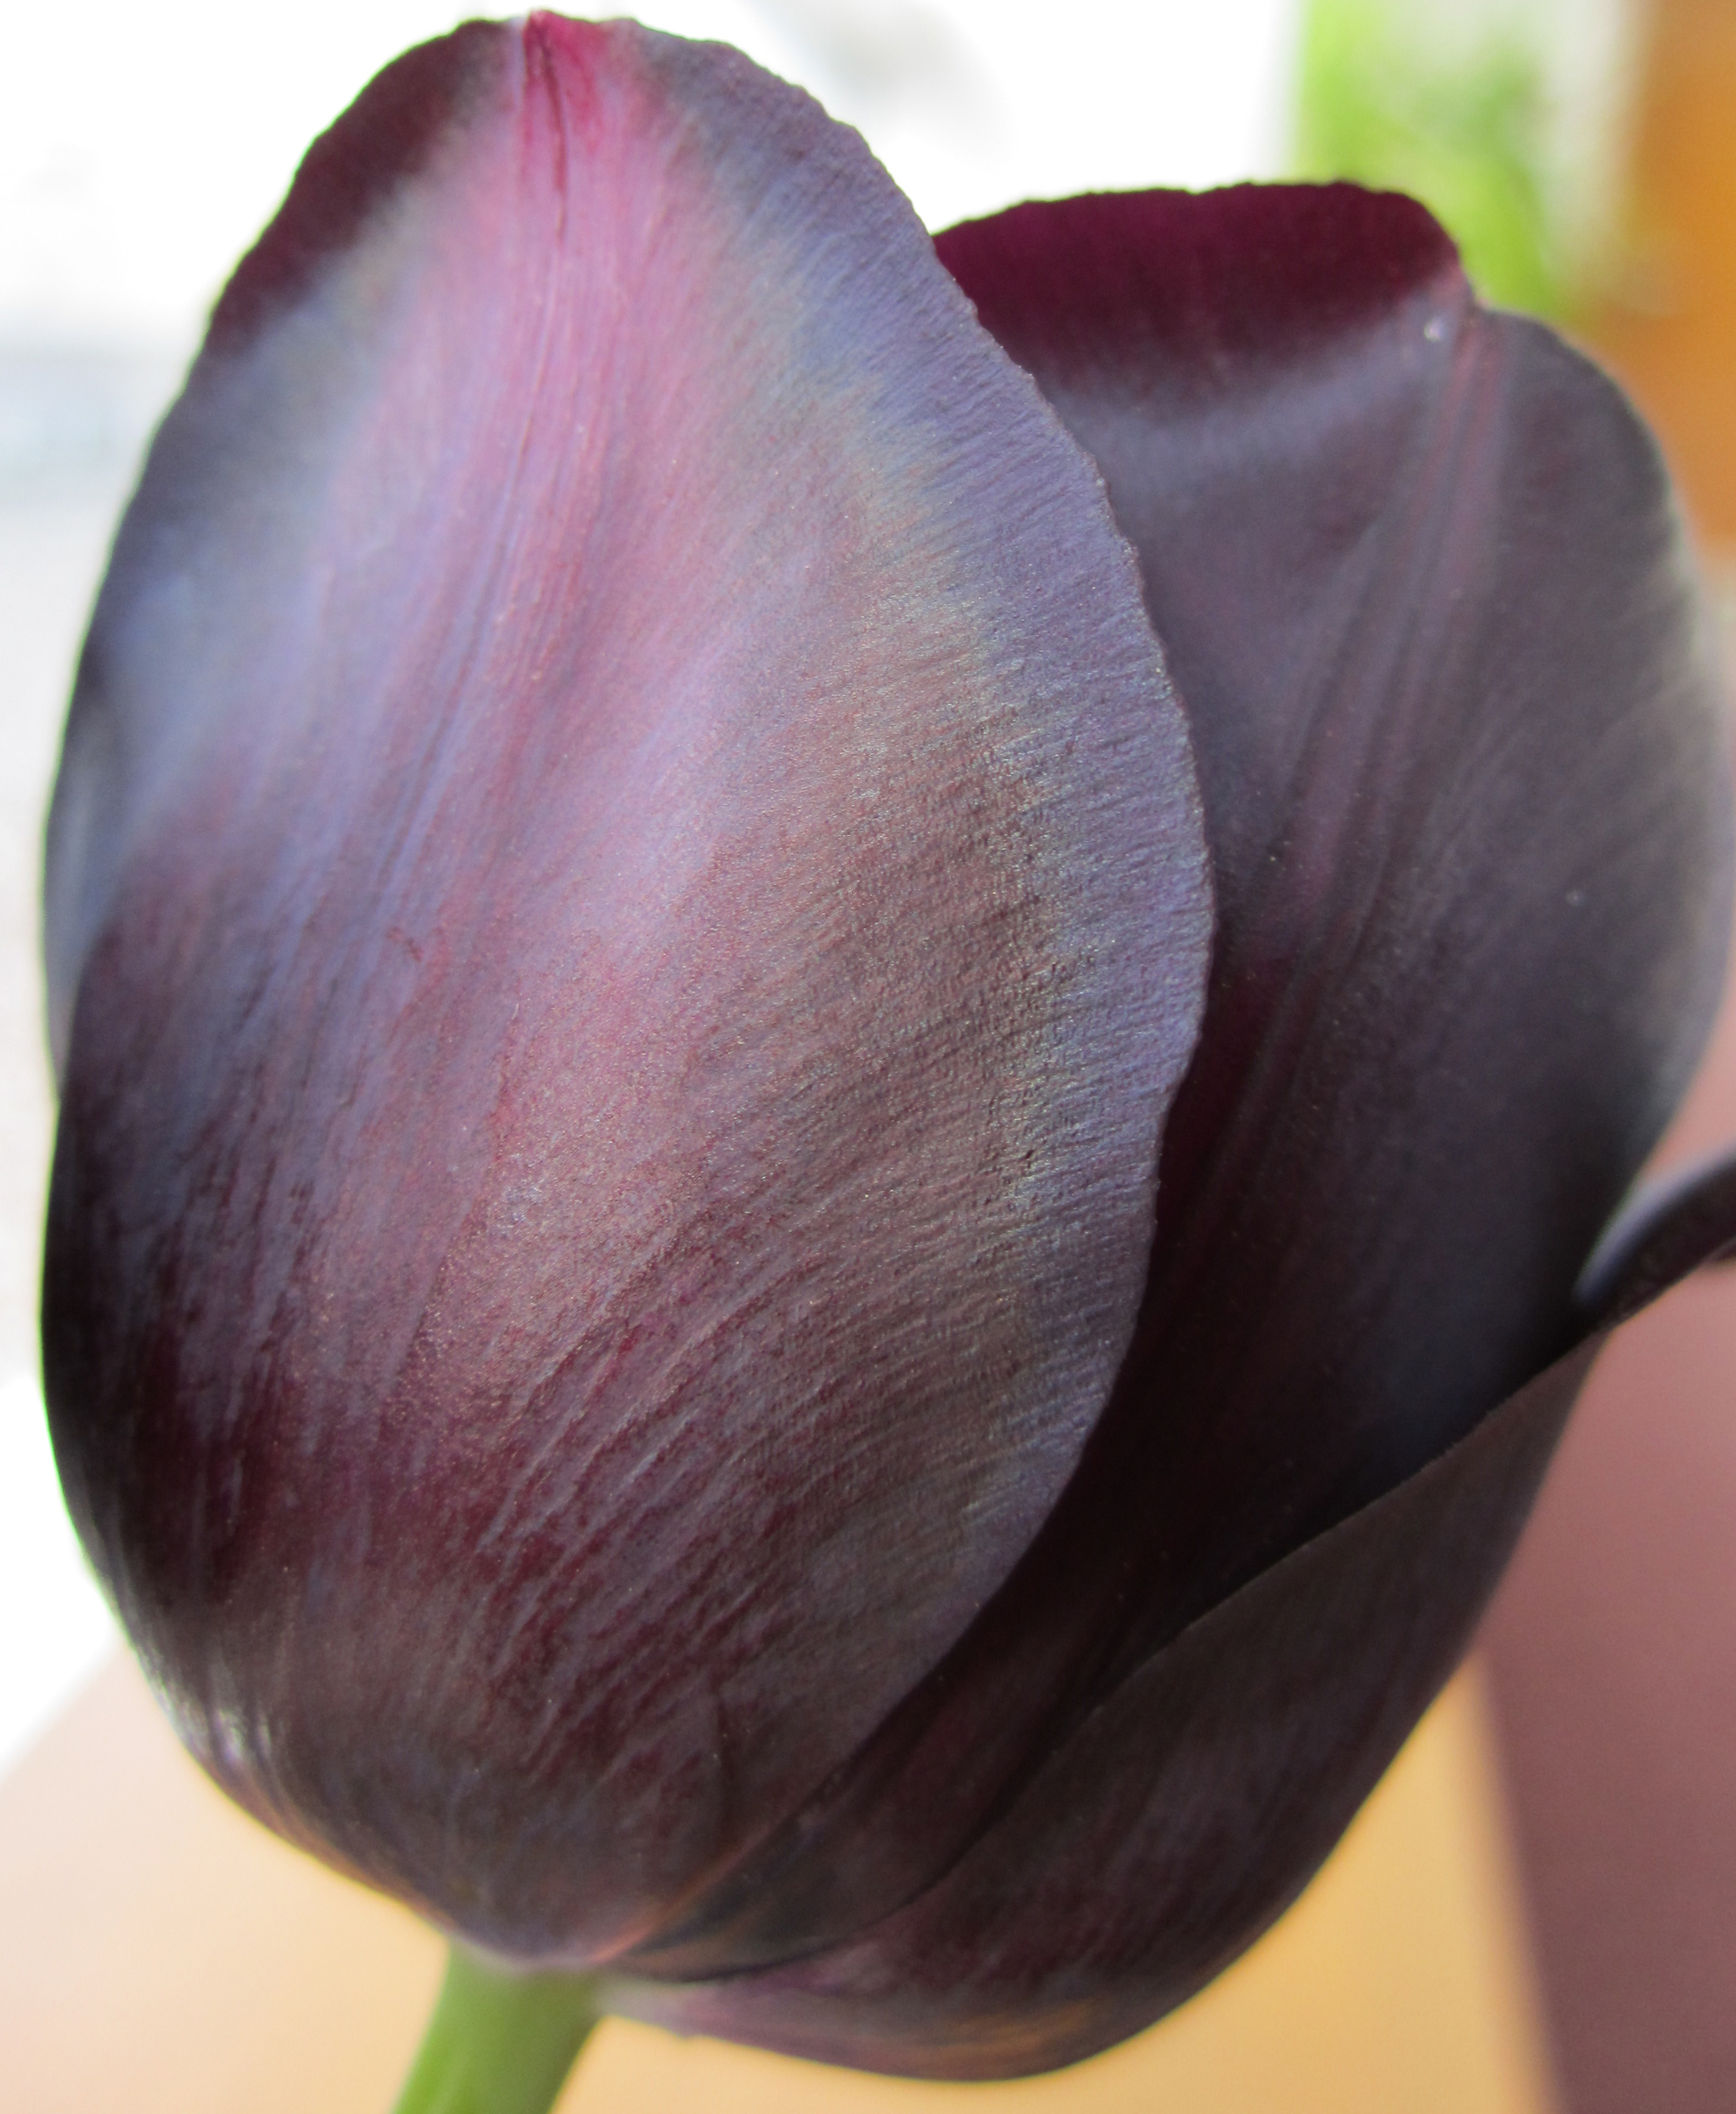 The Queen of the Night tulip displays an iridescent shimmer caused by microscopic ridges on its petals that diffract light. 